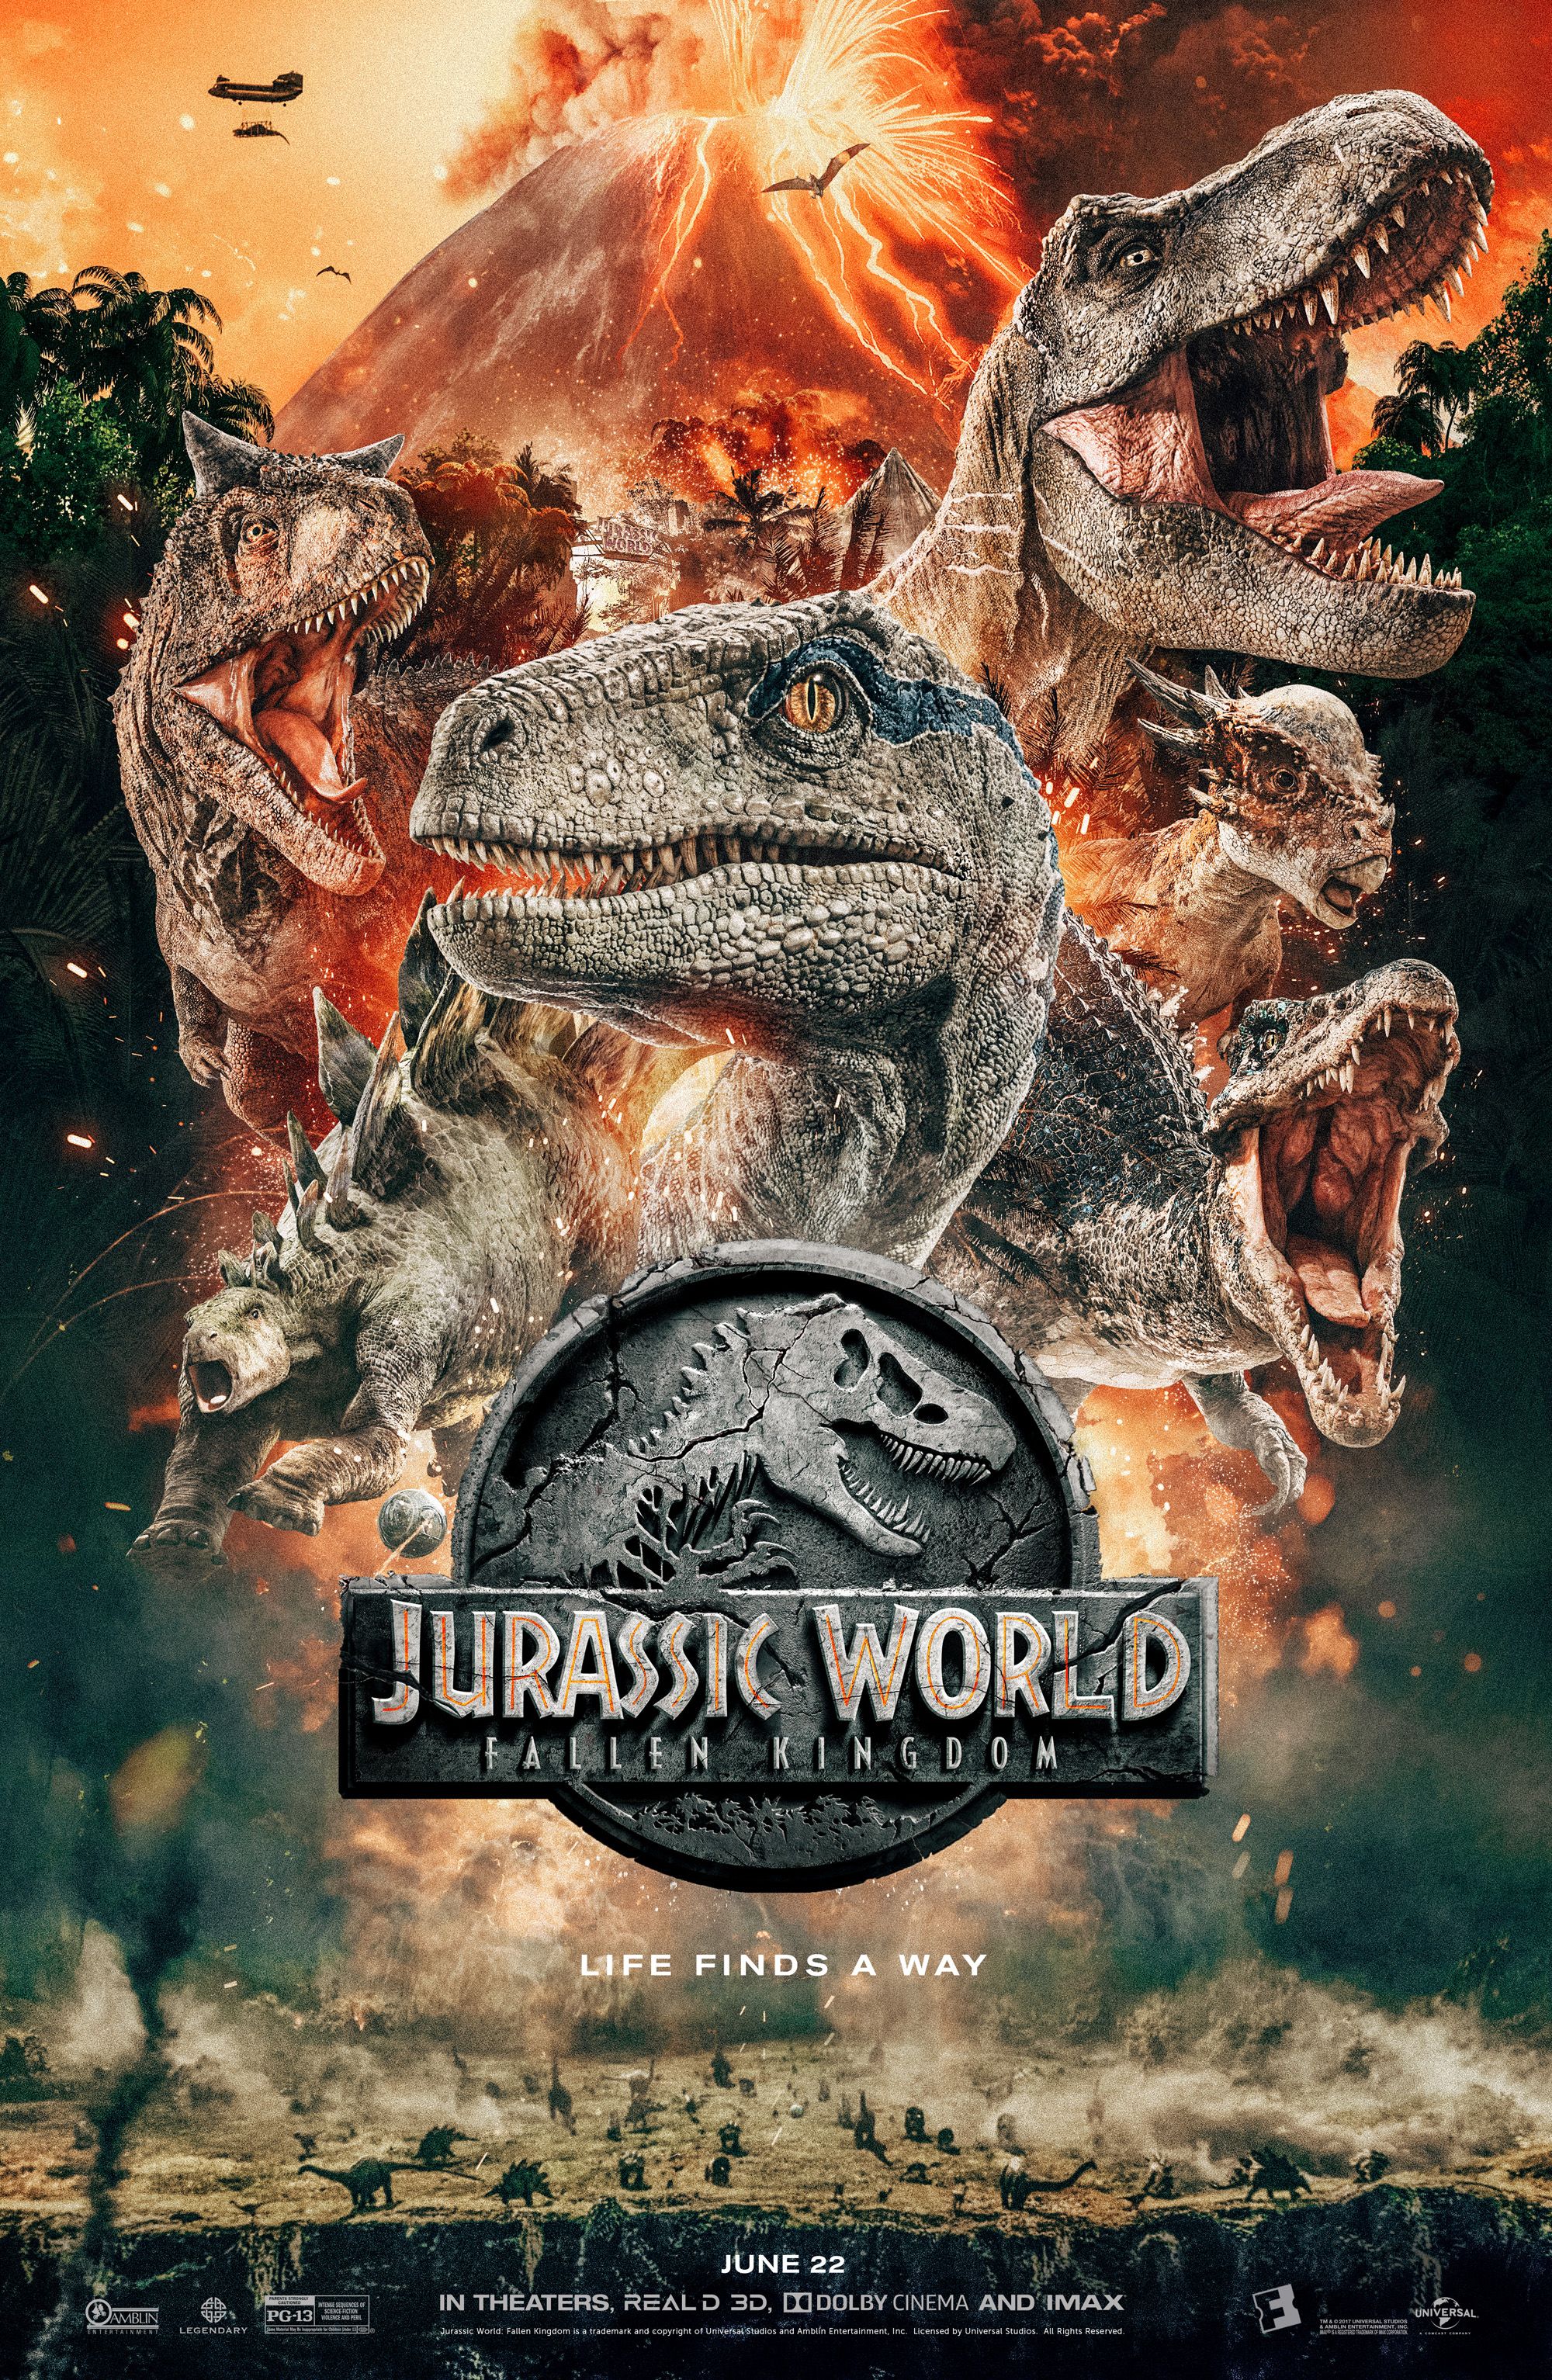 Jurassic World: Fallen Kingdom Poster Available with Ticket Purchase